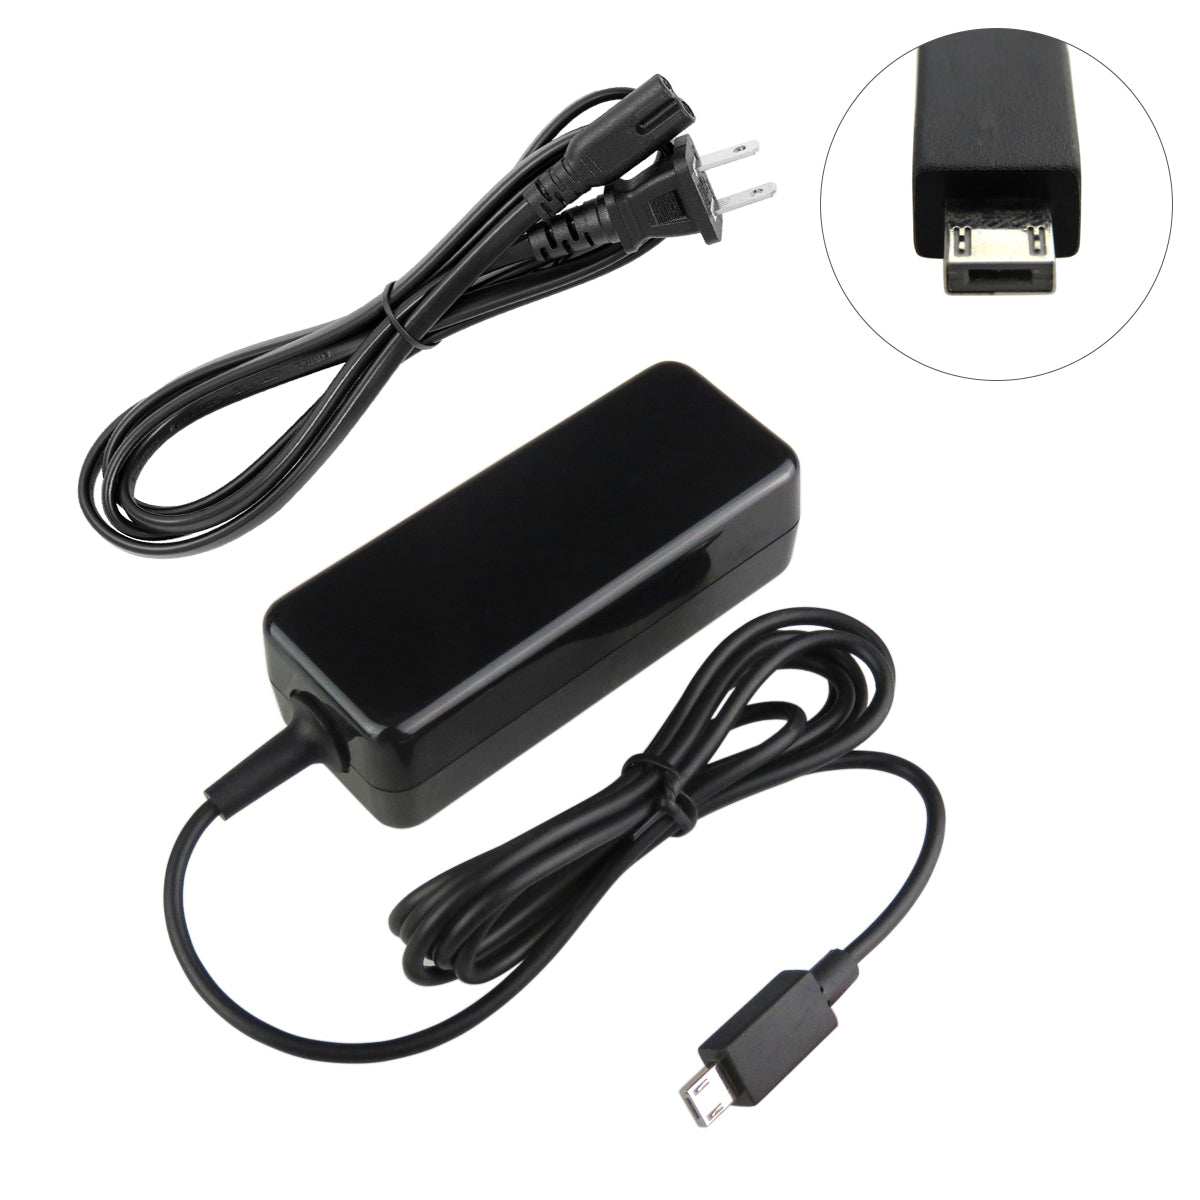 Charger for ASUS EeeBook E202SA Laptop.